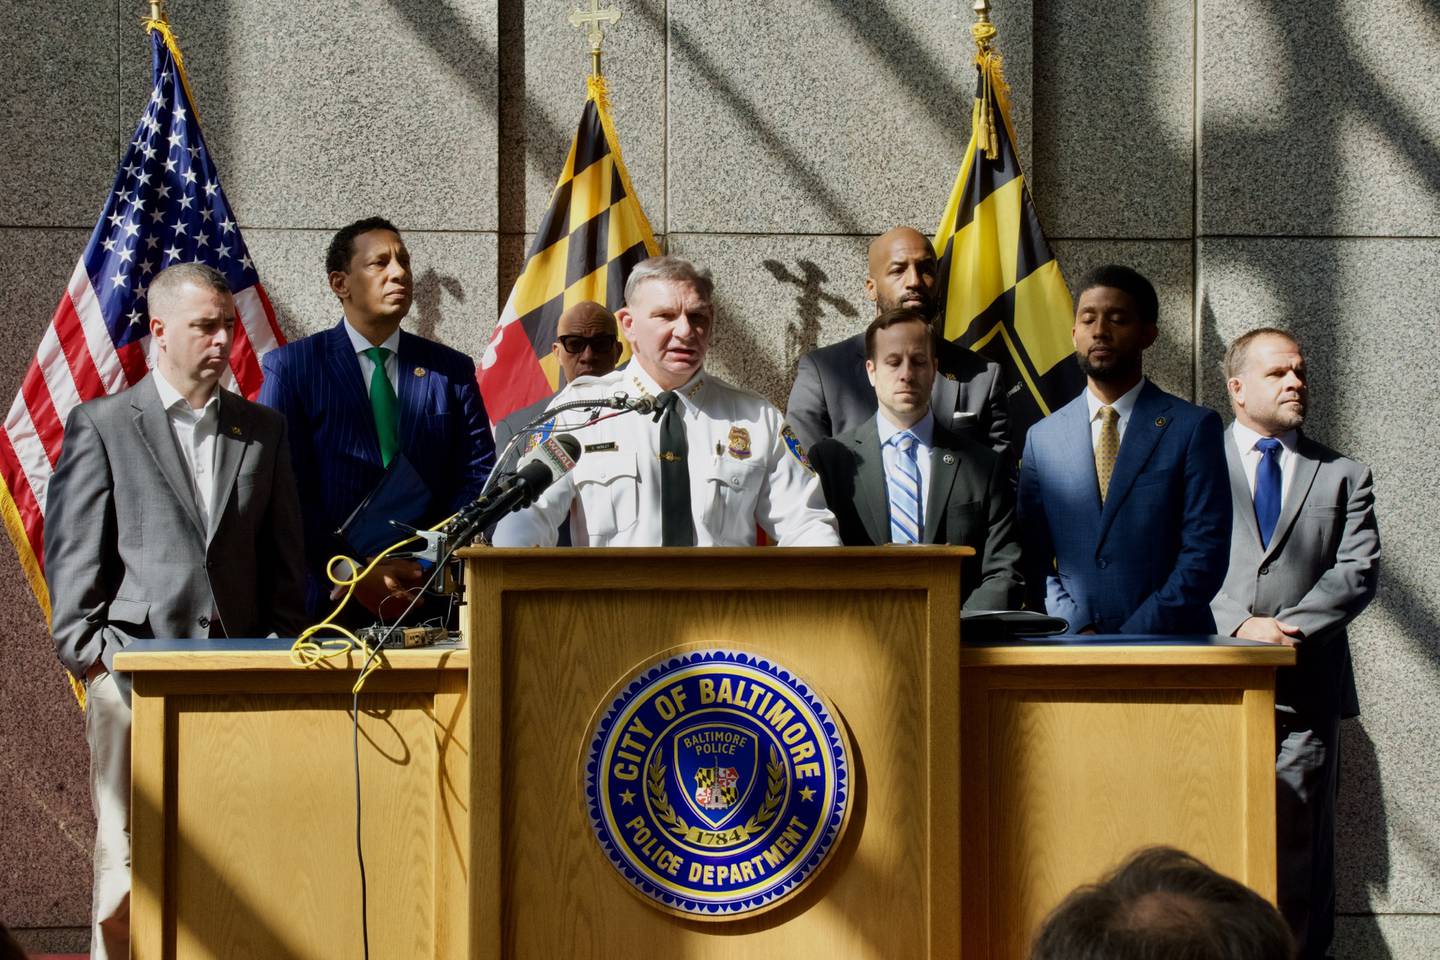 Baltimore acting Police Commissioner Richard Worley, U.S. Marshals Chief Deputy Mathew Silverman, Baltimore Mayor Brandon M. Scott, and Baltimore City State's Attorney Ivan J. Bates host a press conference at police headquarters on the arrest of Jason Billingsley, the suspect in the killing of Pava LaPere, on Sept. 28, 2023. Billingsley was apprehended at a train station in Bowie late last night. (Kaitlin Newman/The Baltimore Banner)